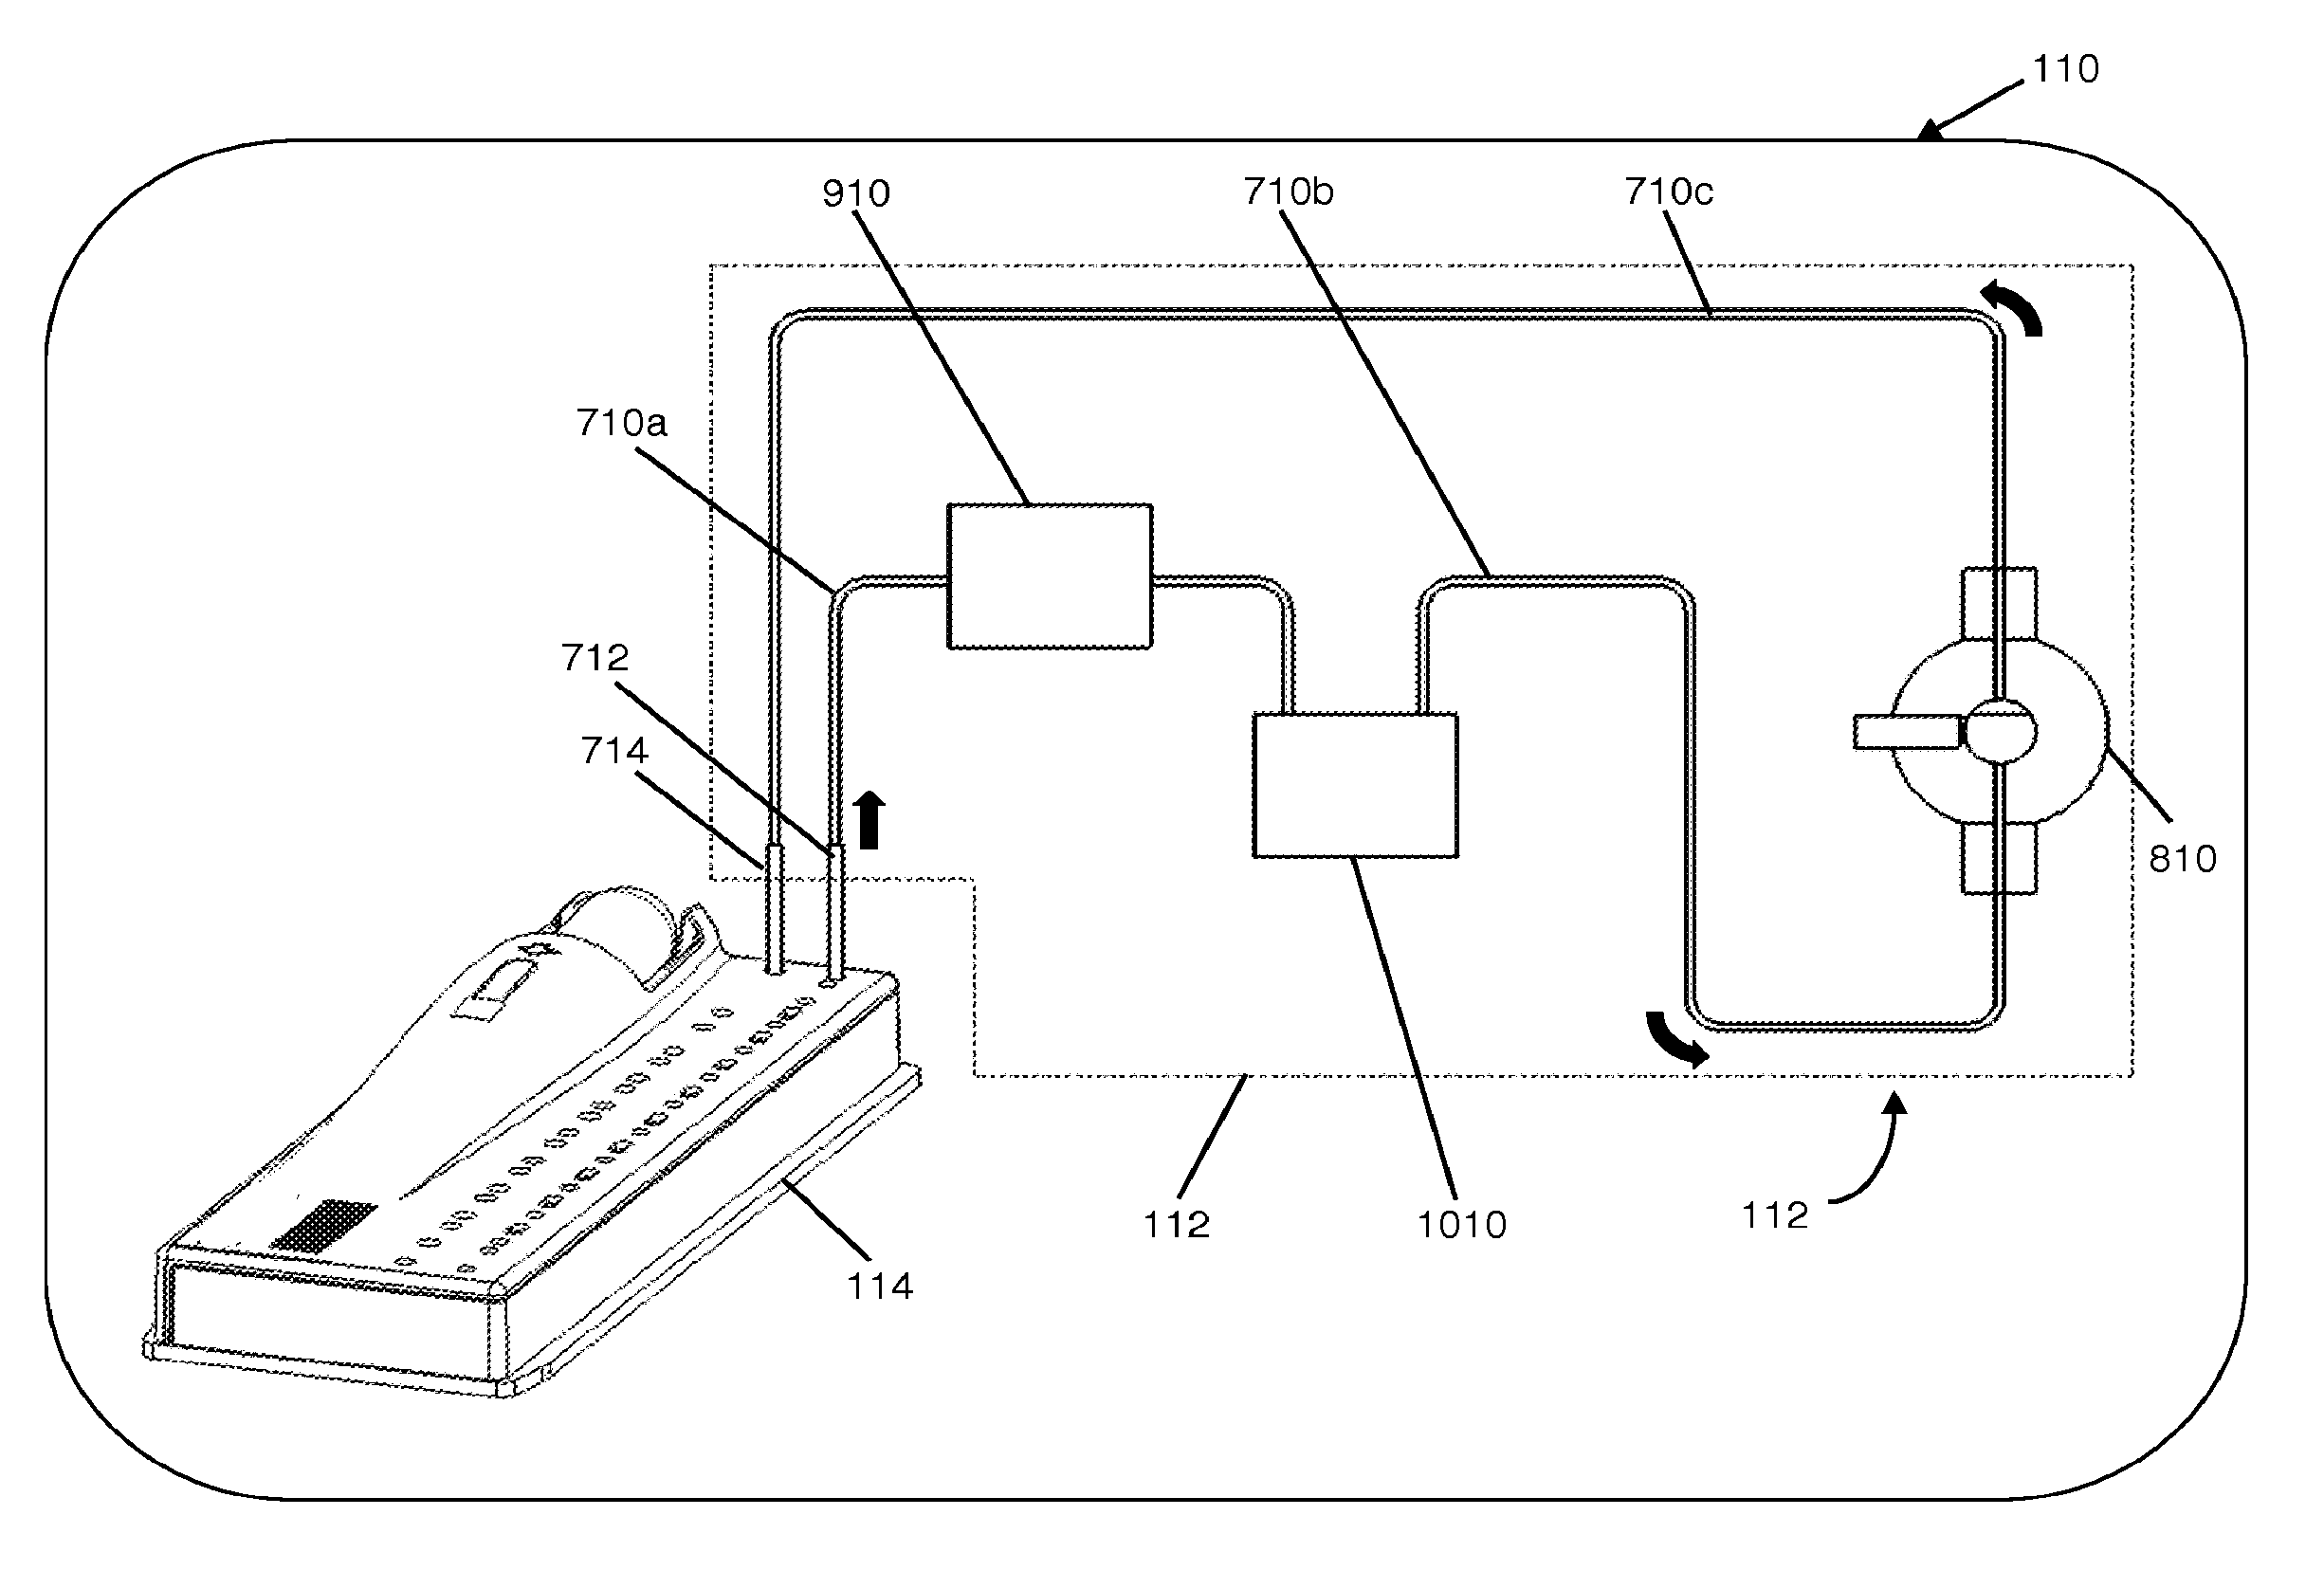 Clinical diagnostic system including instrument and cartridge